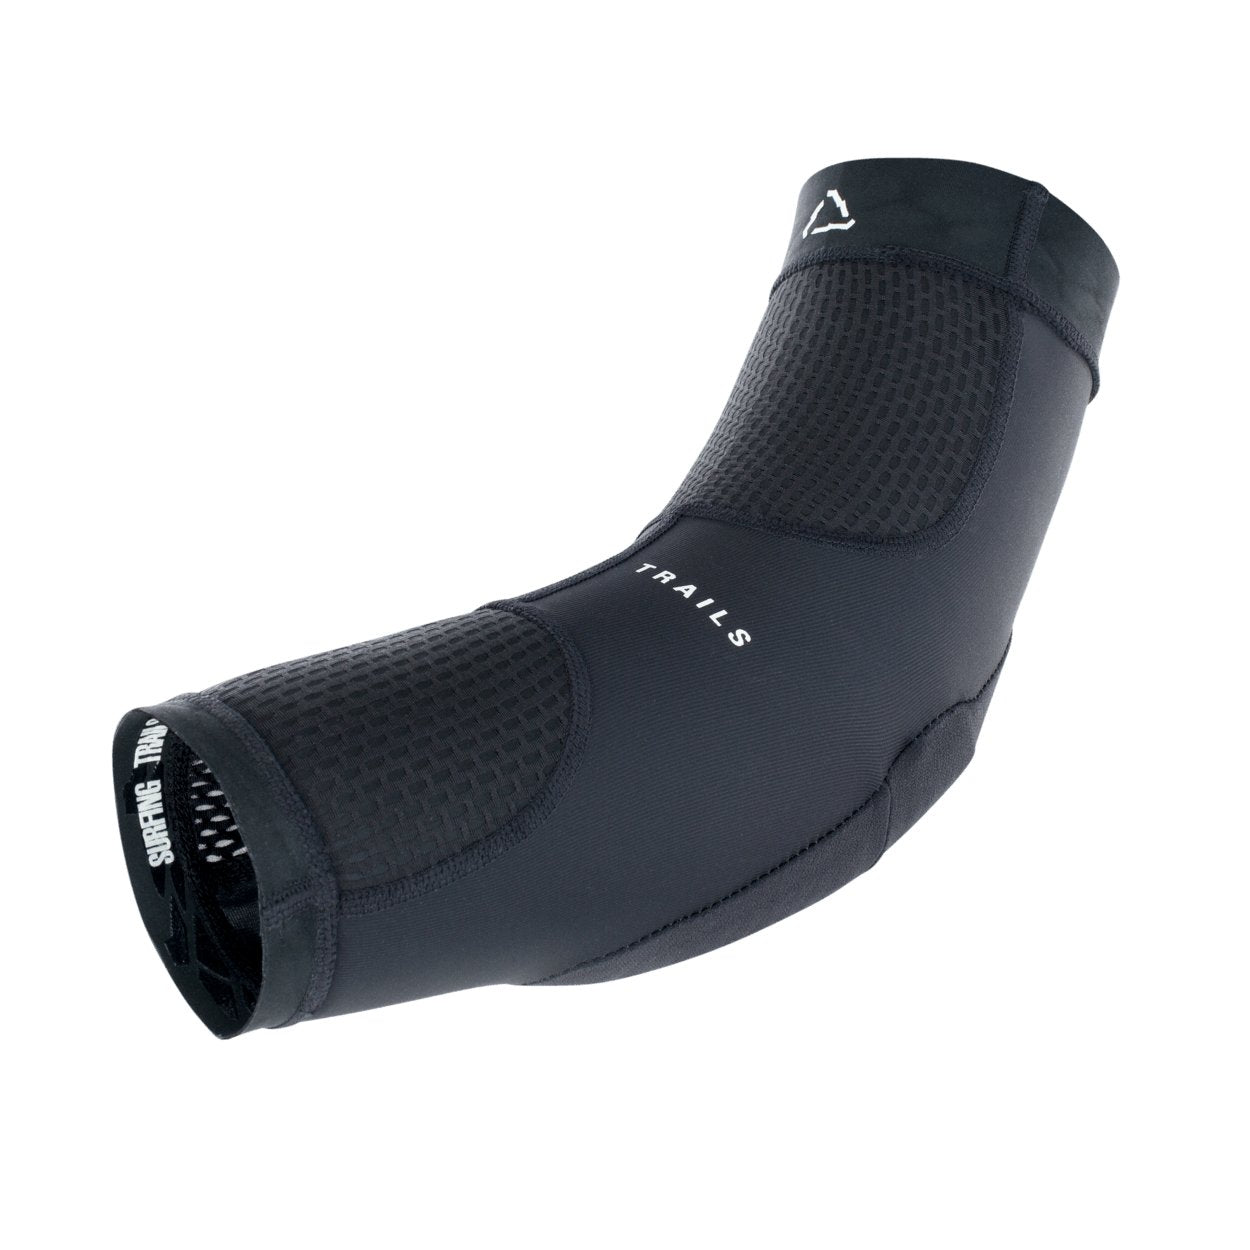 ION MTB Elbow Pads E-Sleeve Amp 2024 - Worthing Watersports - 9008415981571 - Body Armor - ION Bike